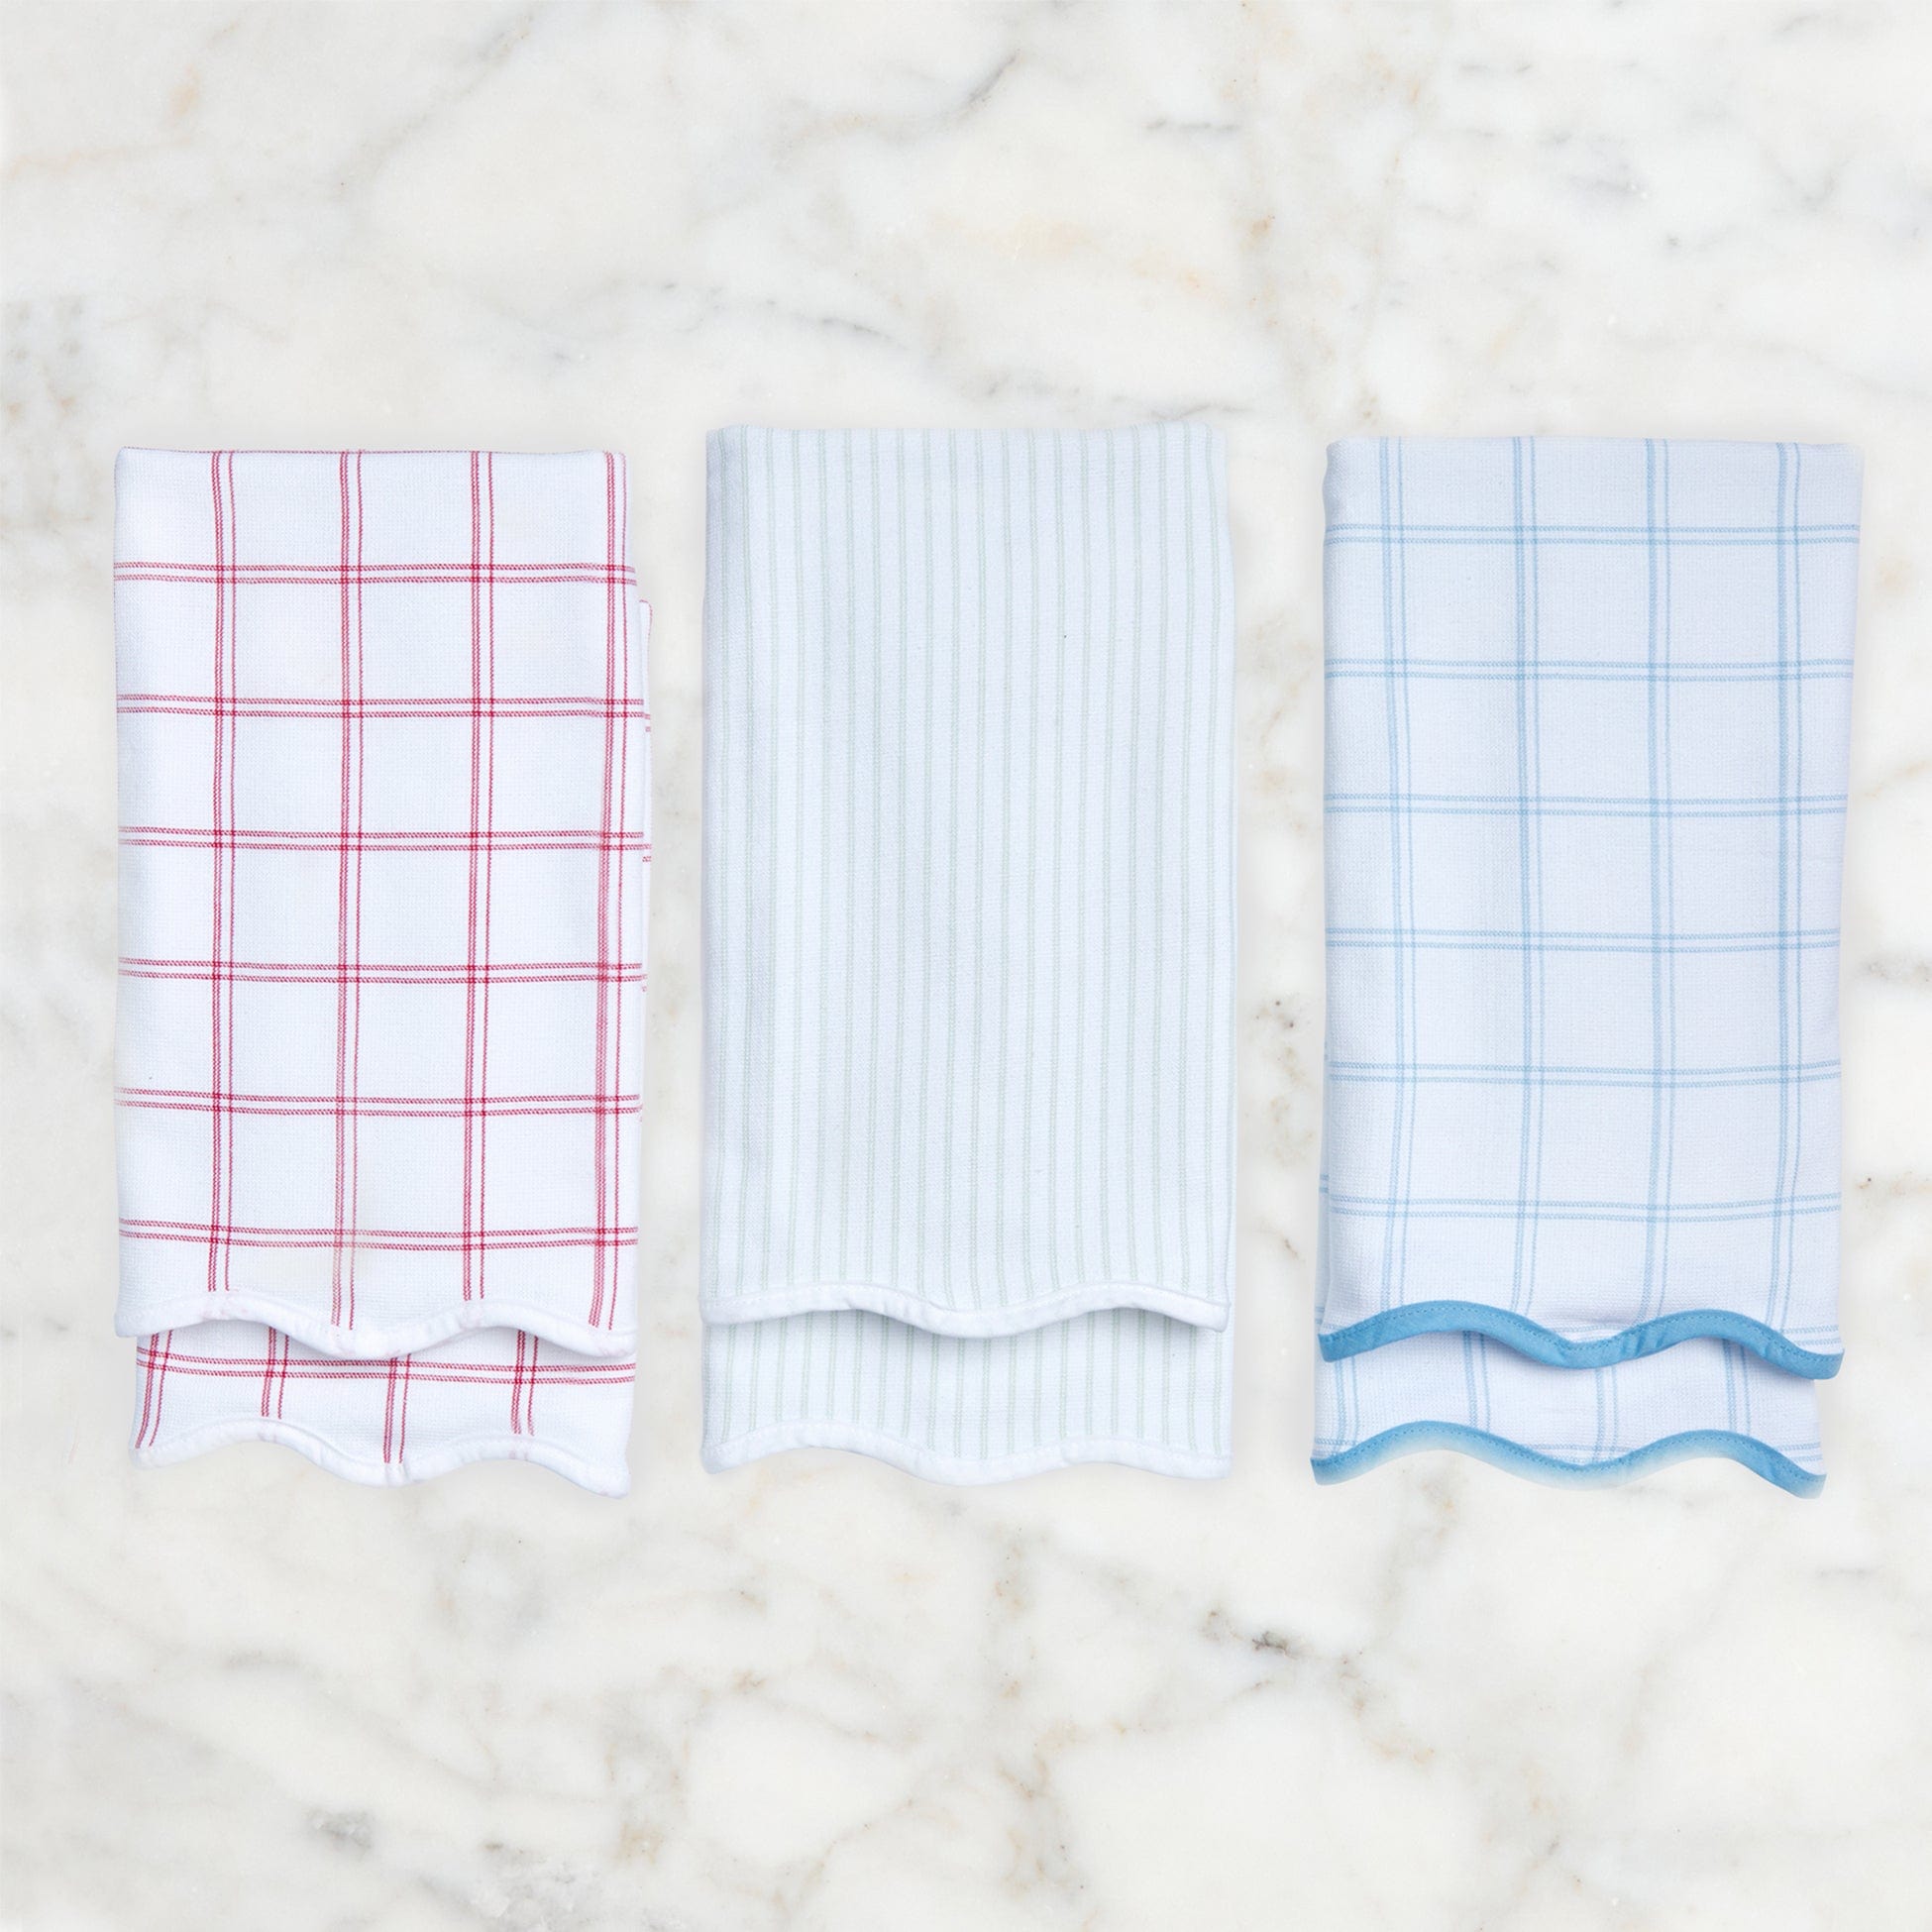 Dish Cloths for Washing Dishes - Kitchen Dish Cloths Sets of 10.23 X  10.23 Washcloths, Pack of 5 Dish Cloth, Quick Dry, Super Soft, Fast  Absorbent